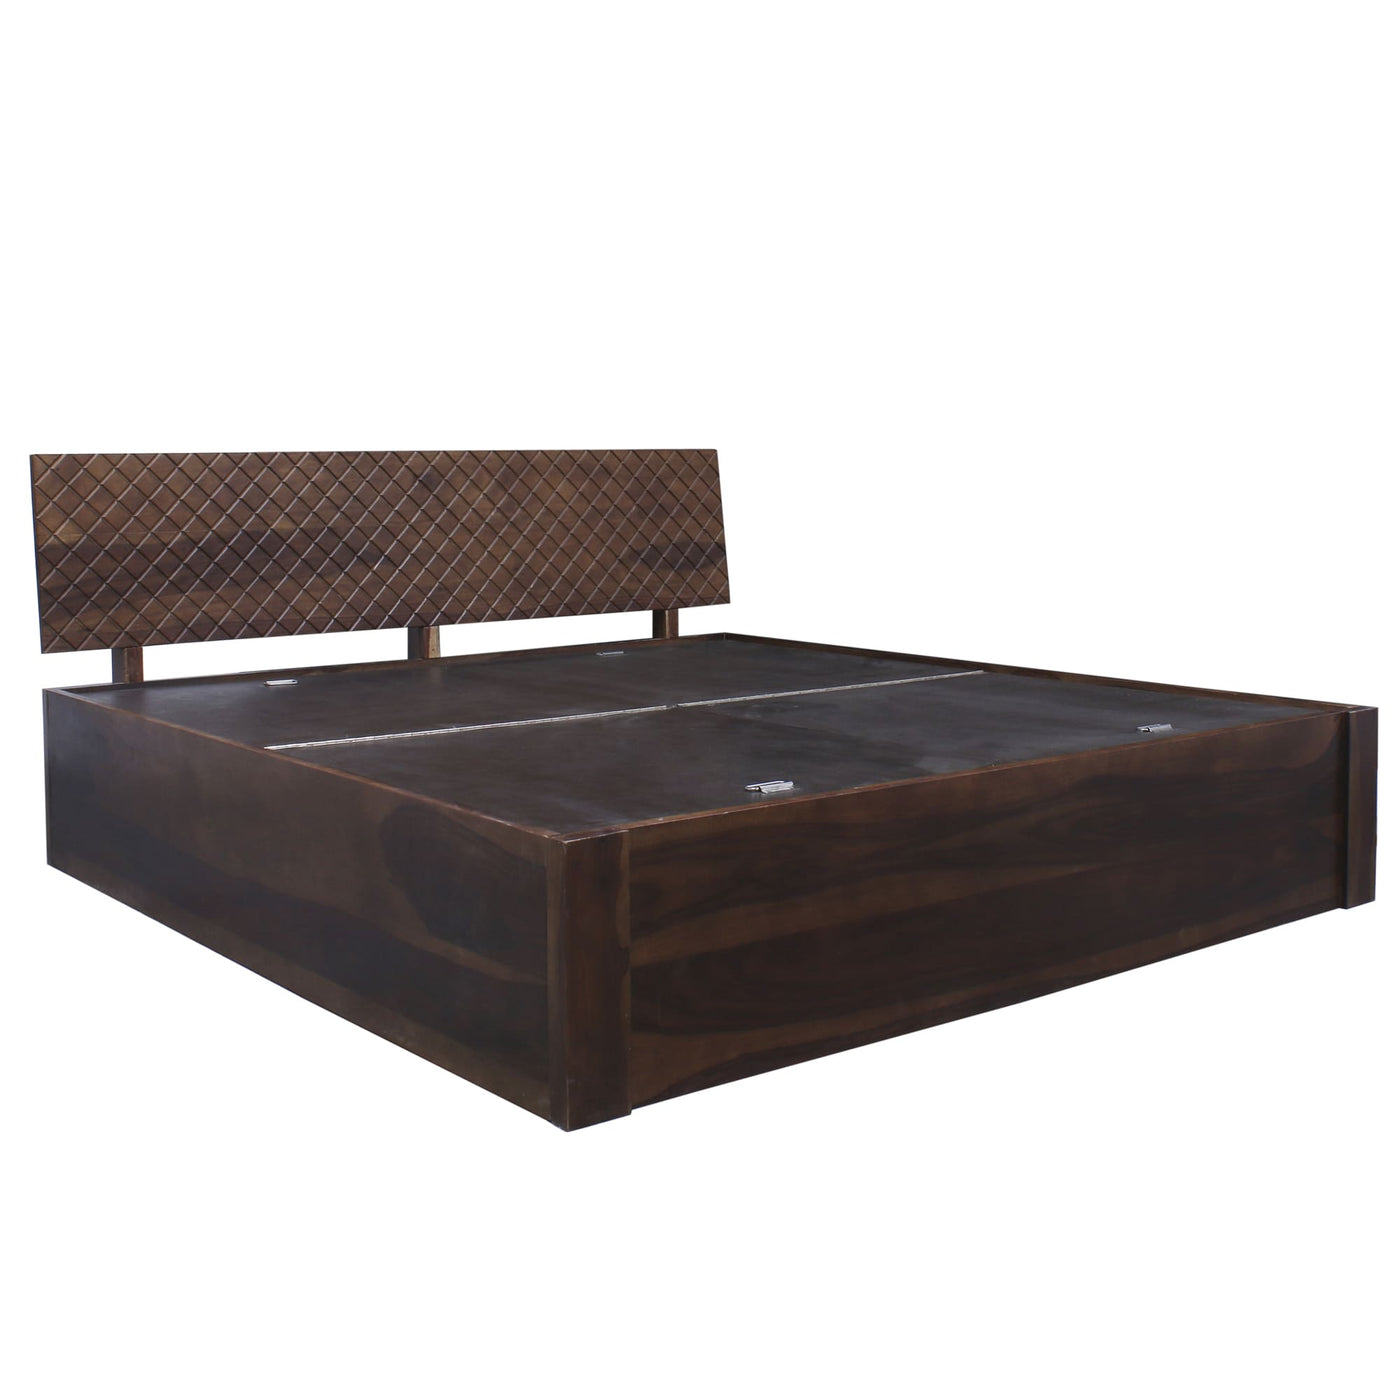 Striate king Bed With Storage